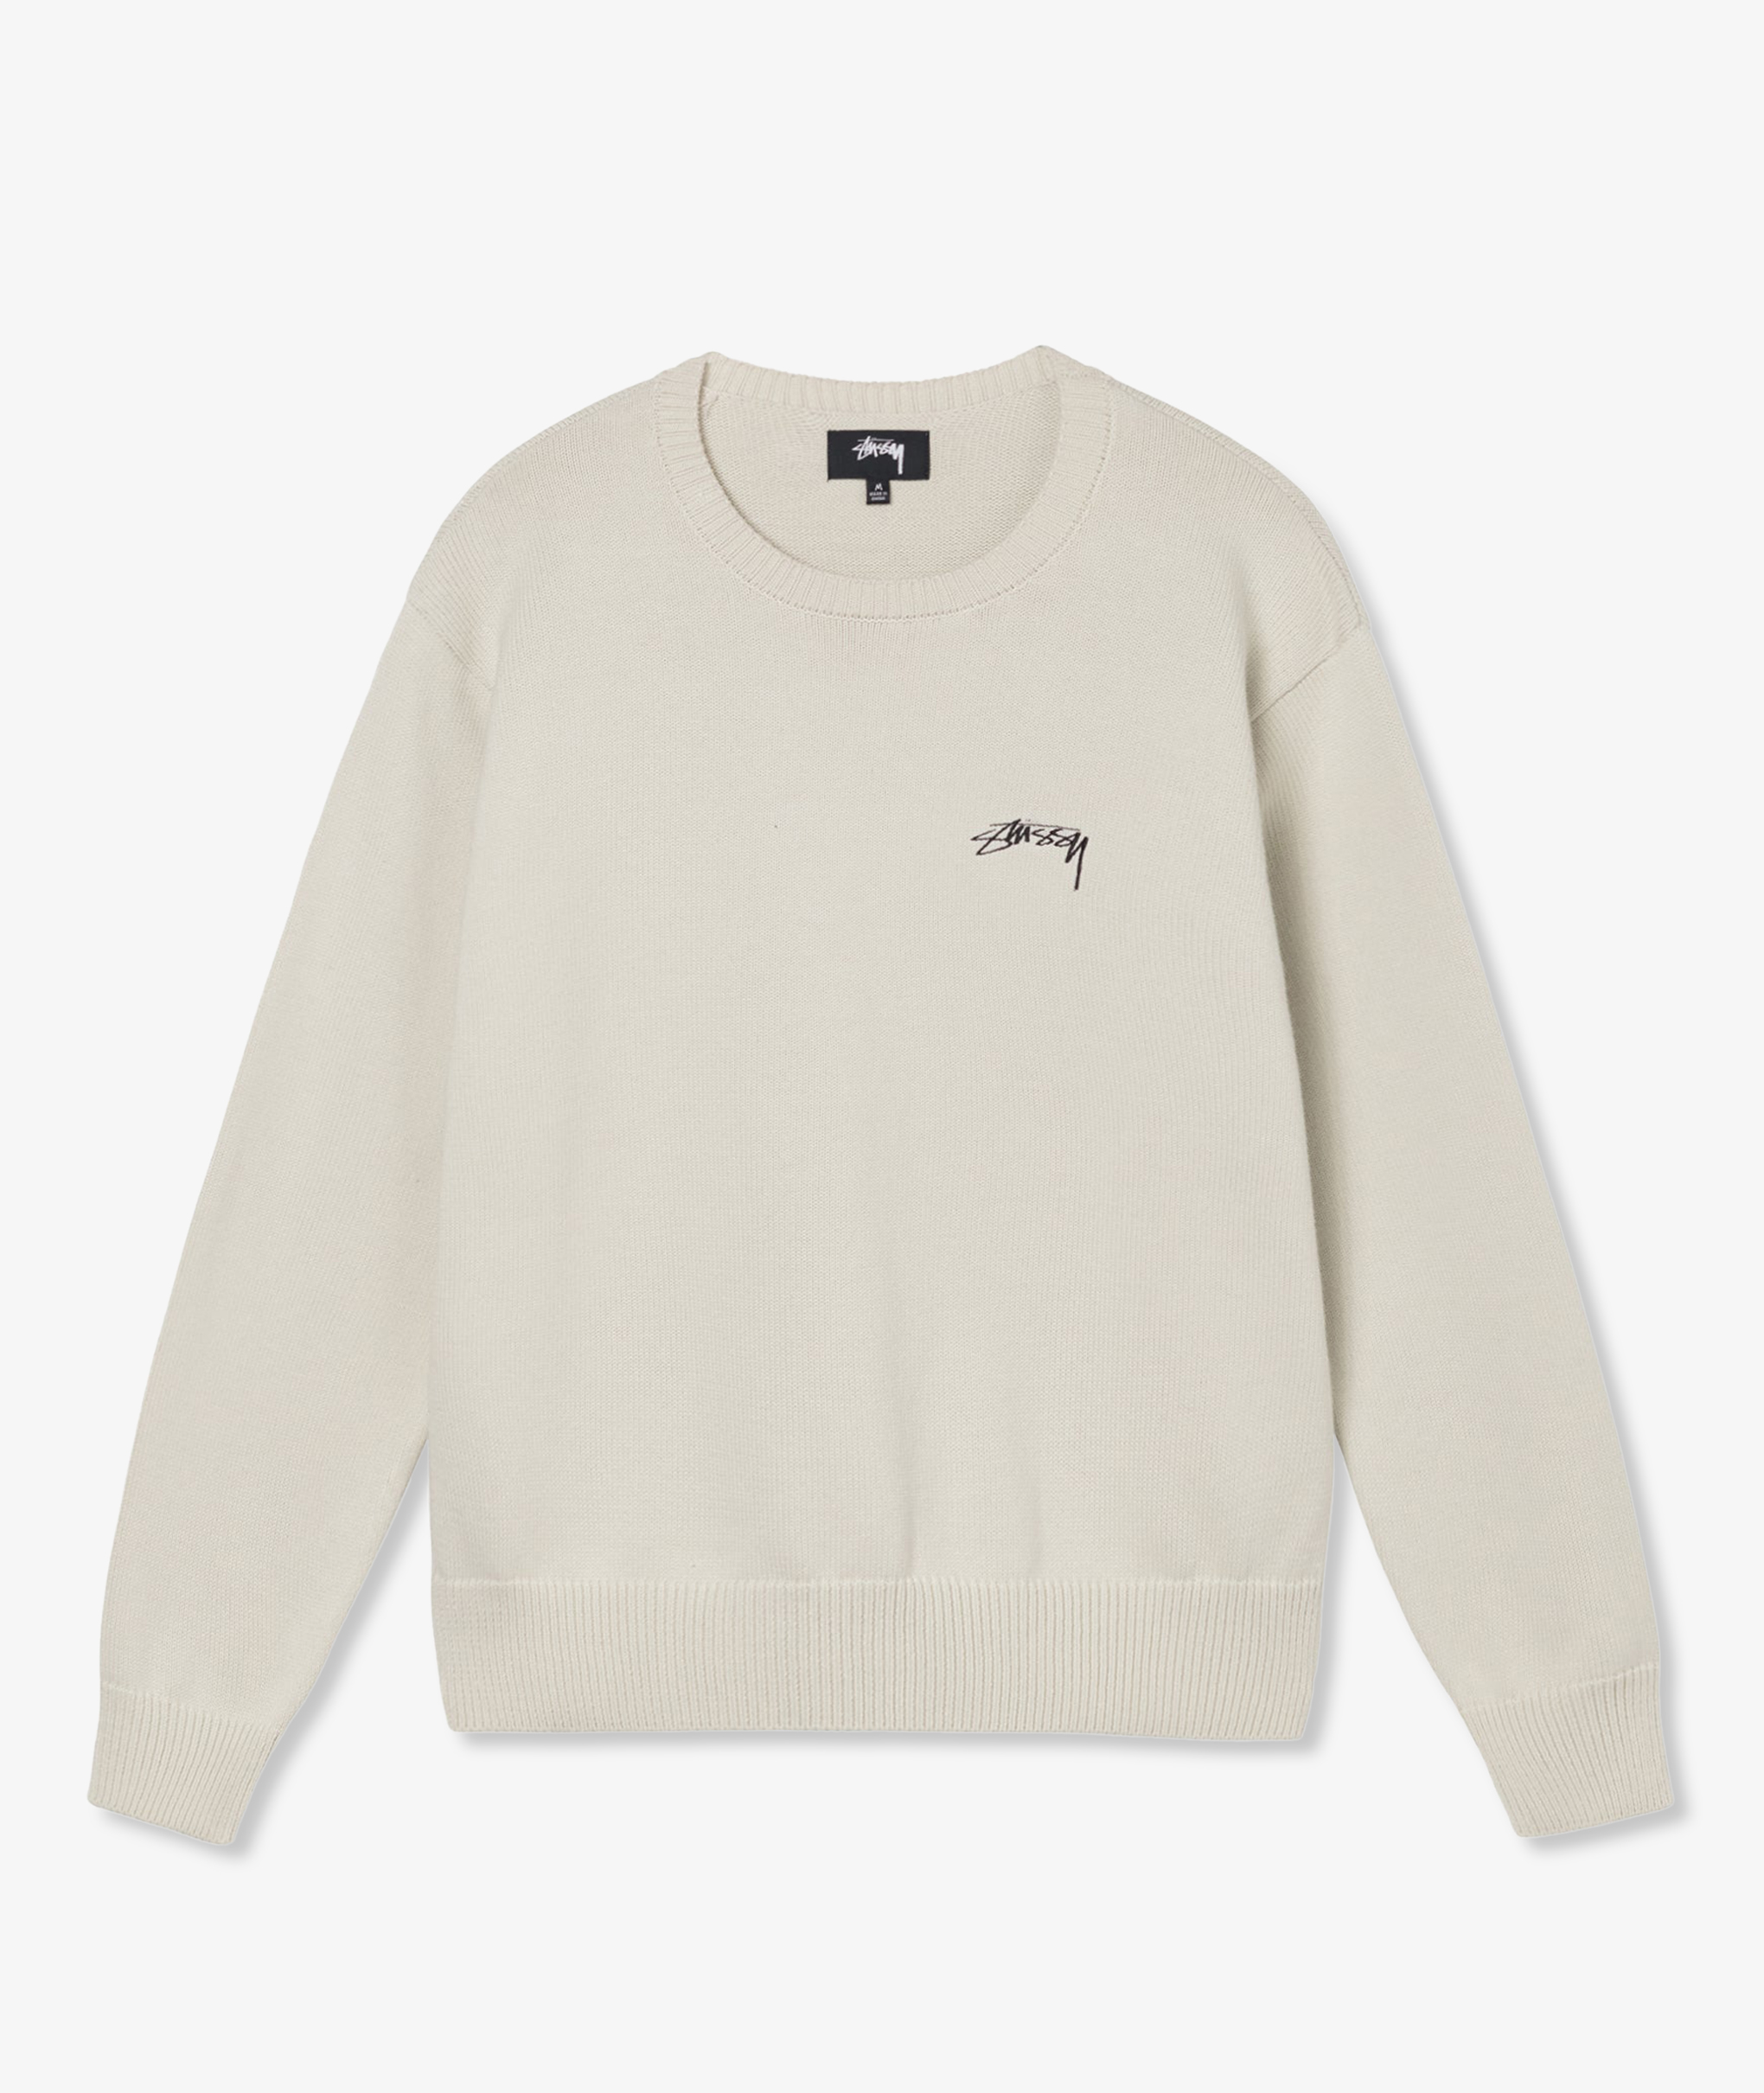 Stussy Care Label Sweater Natural L - fountainheadsolution.com